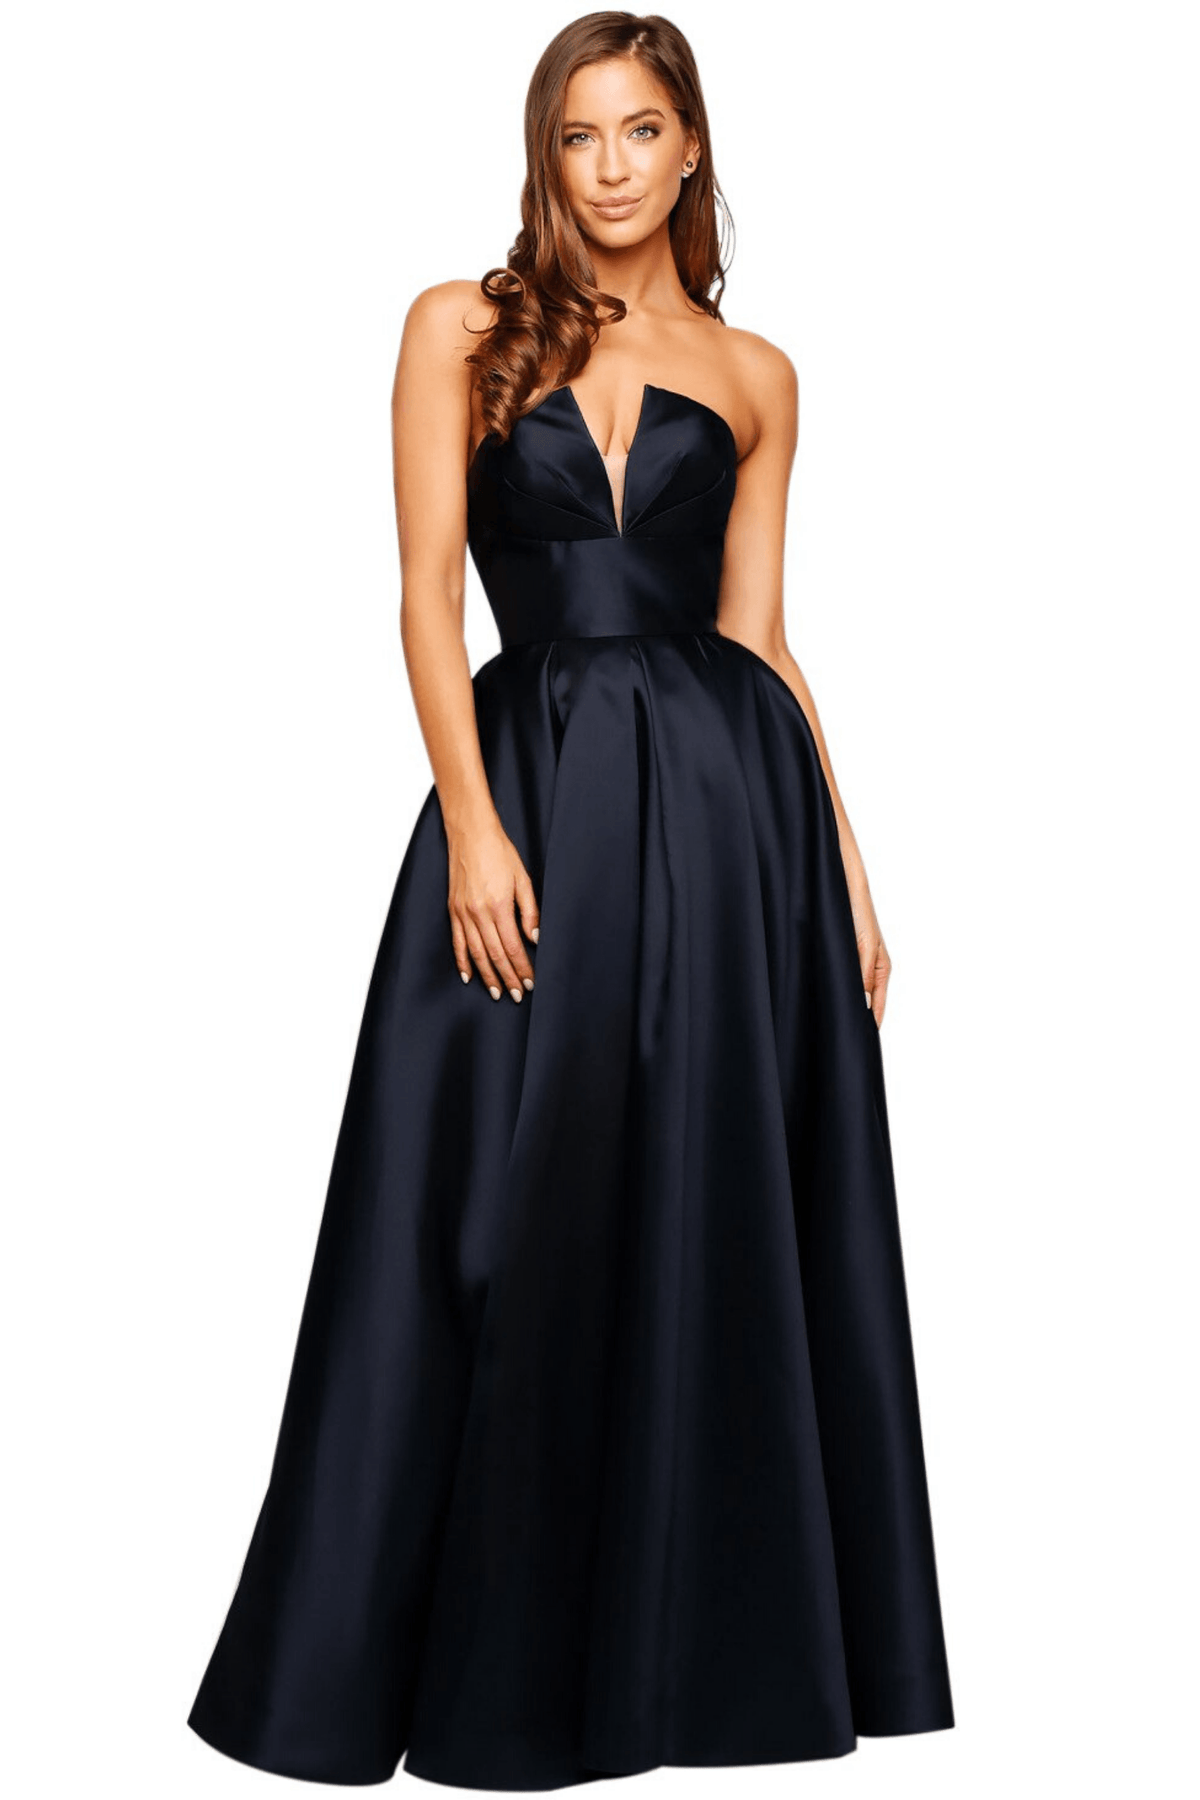 Rent TINAHOLY Lucille Gown TA611 (Navy Blue) HIRE NOW! | Dress for a Night